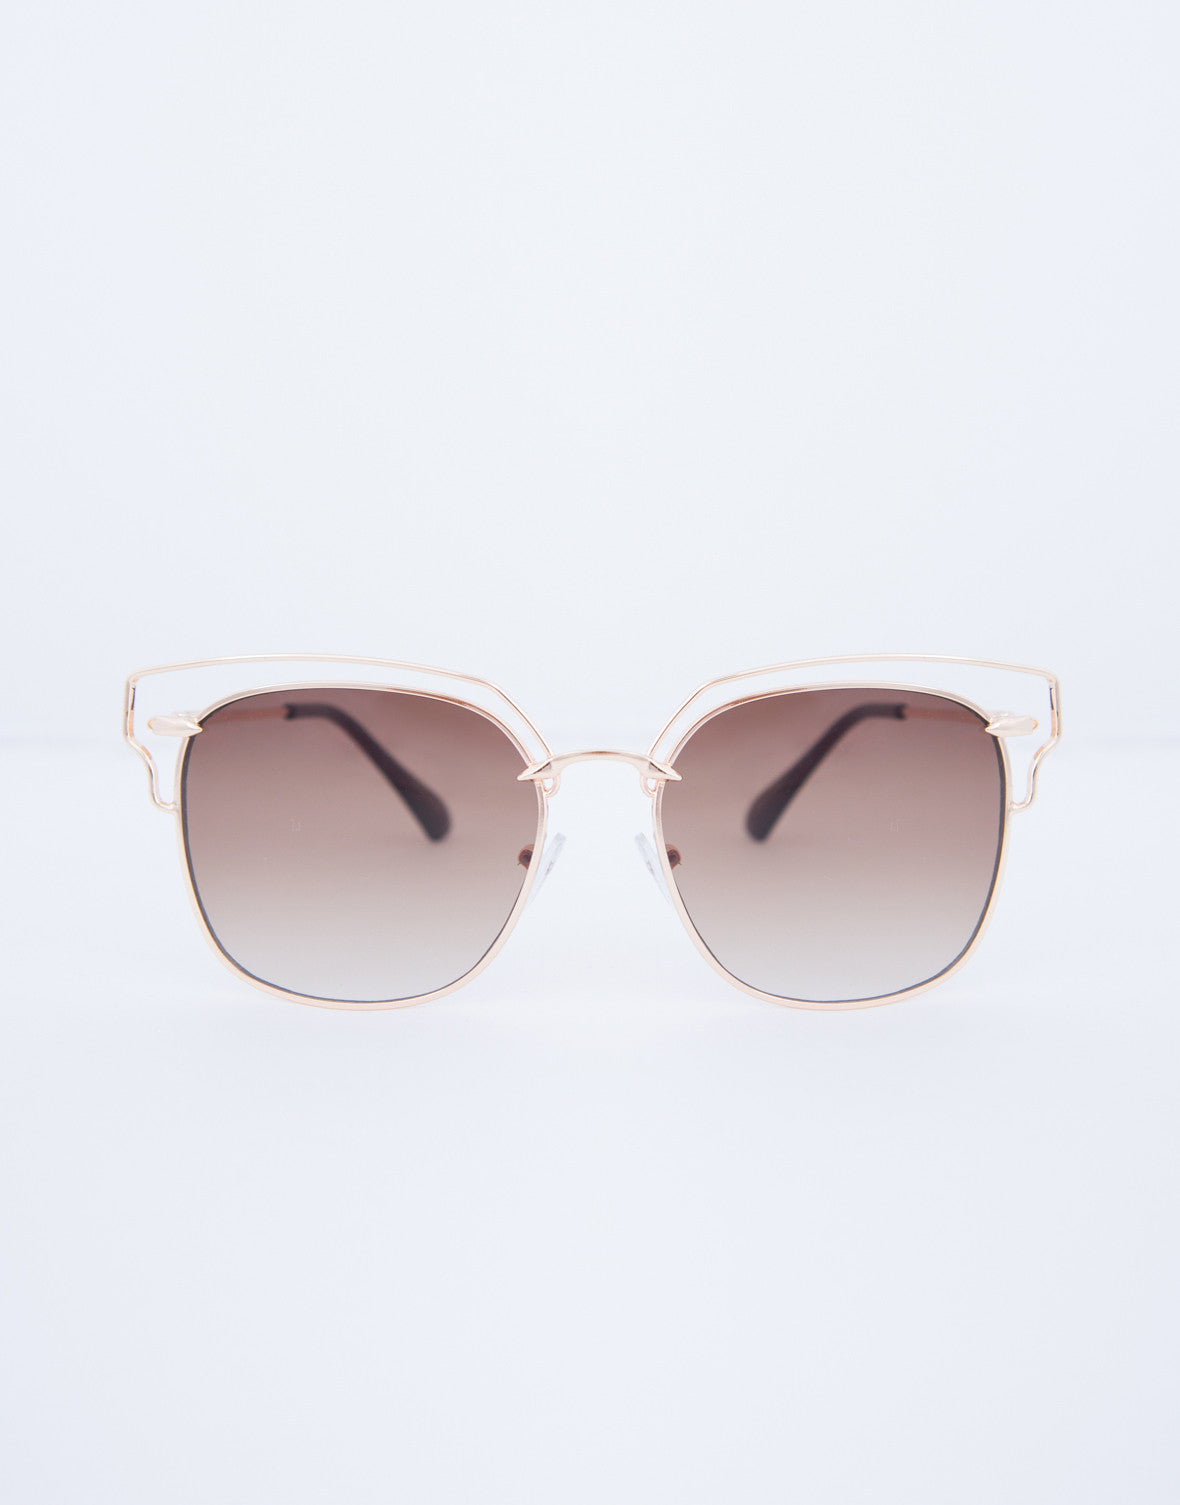 Framed Mirrored Sunnies - Color Mirrored Aviators - Thin Framed ...